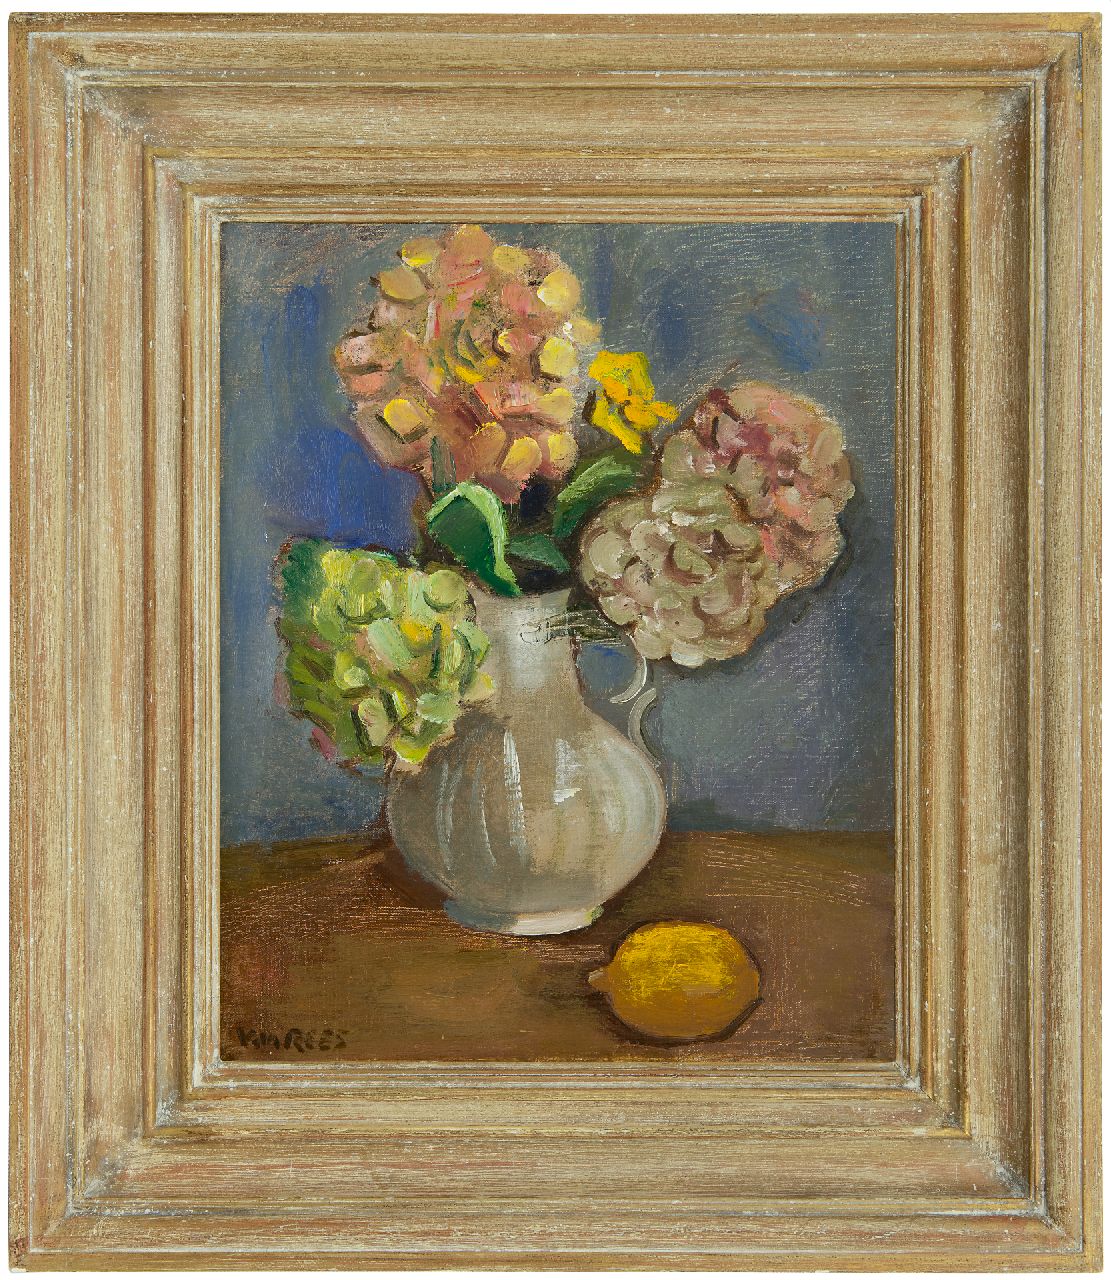 Rees O. van | Otto van Rees | Paintings offered for sale | Still life with hydrangea and a lemon, oil on canvas 50.5 x 40.5 cm, signed l.l.